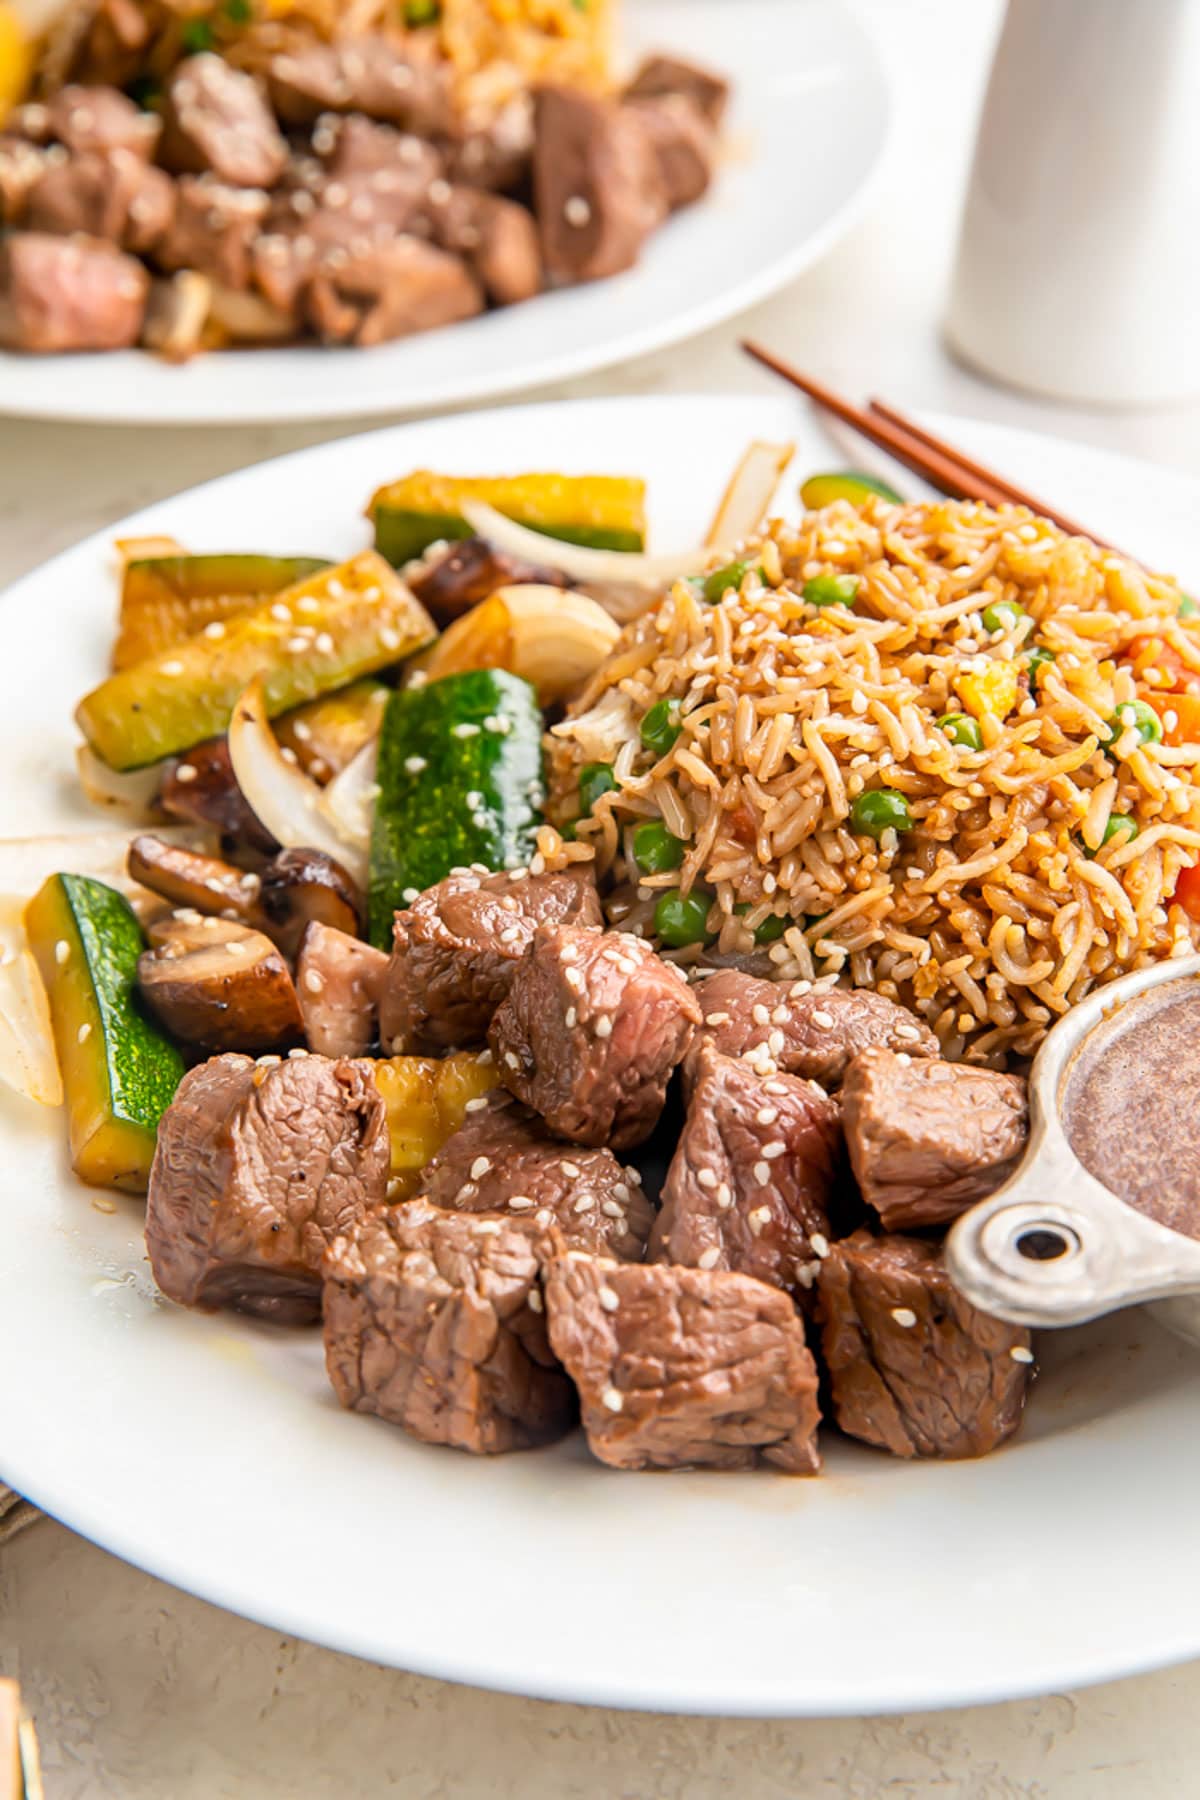 A plate of hibachi steak in sauce with stir-fry vegetables and a mound of delicious fried rice.